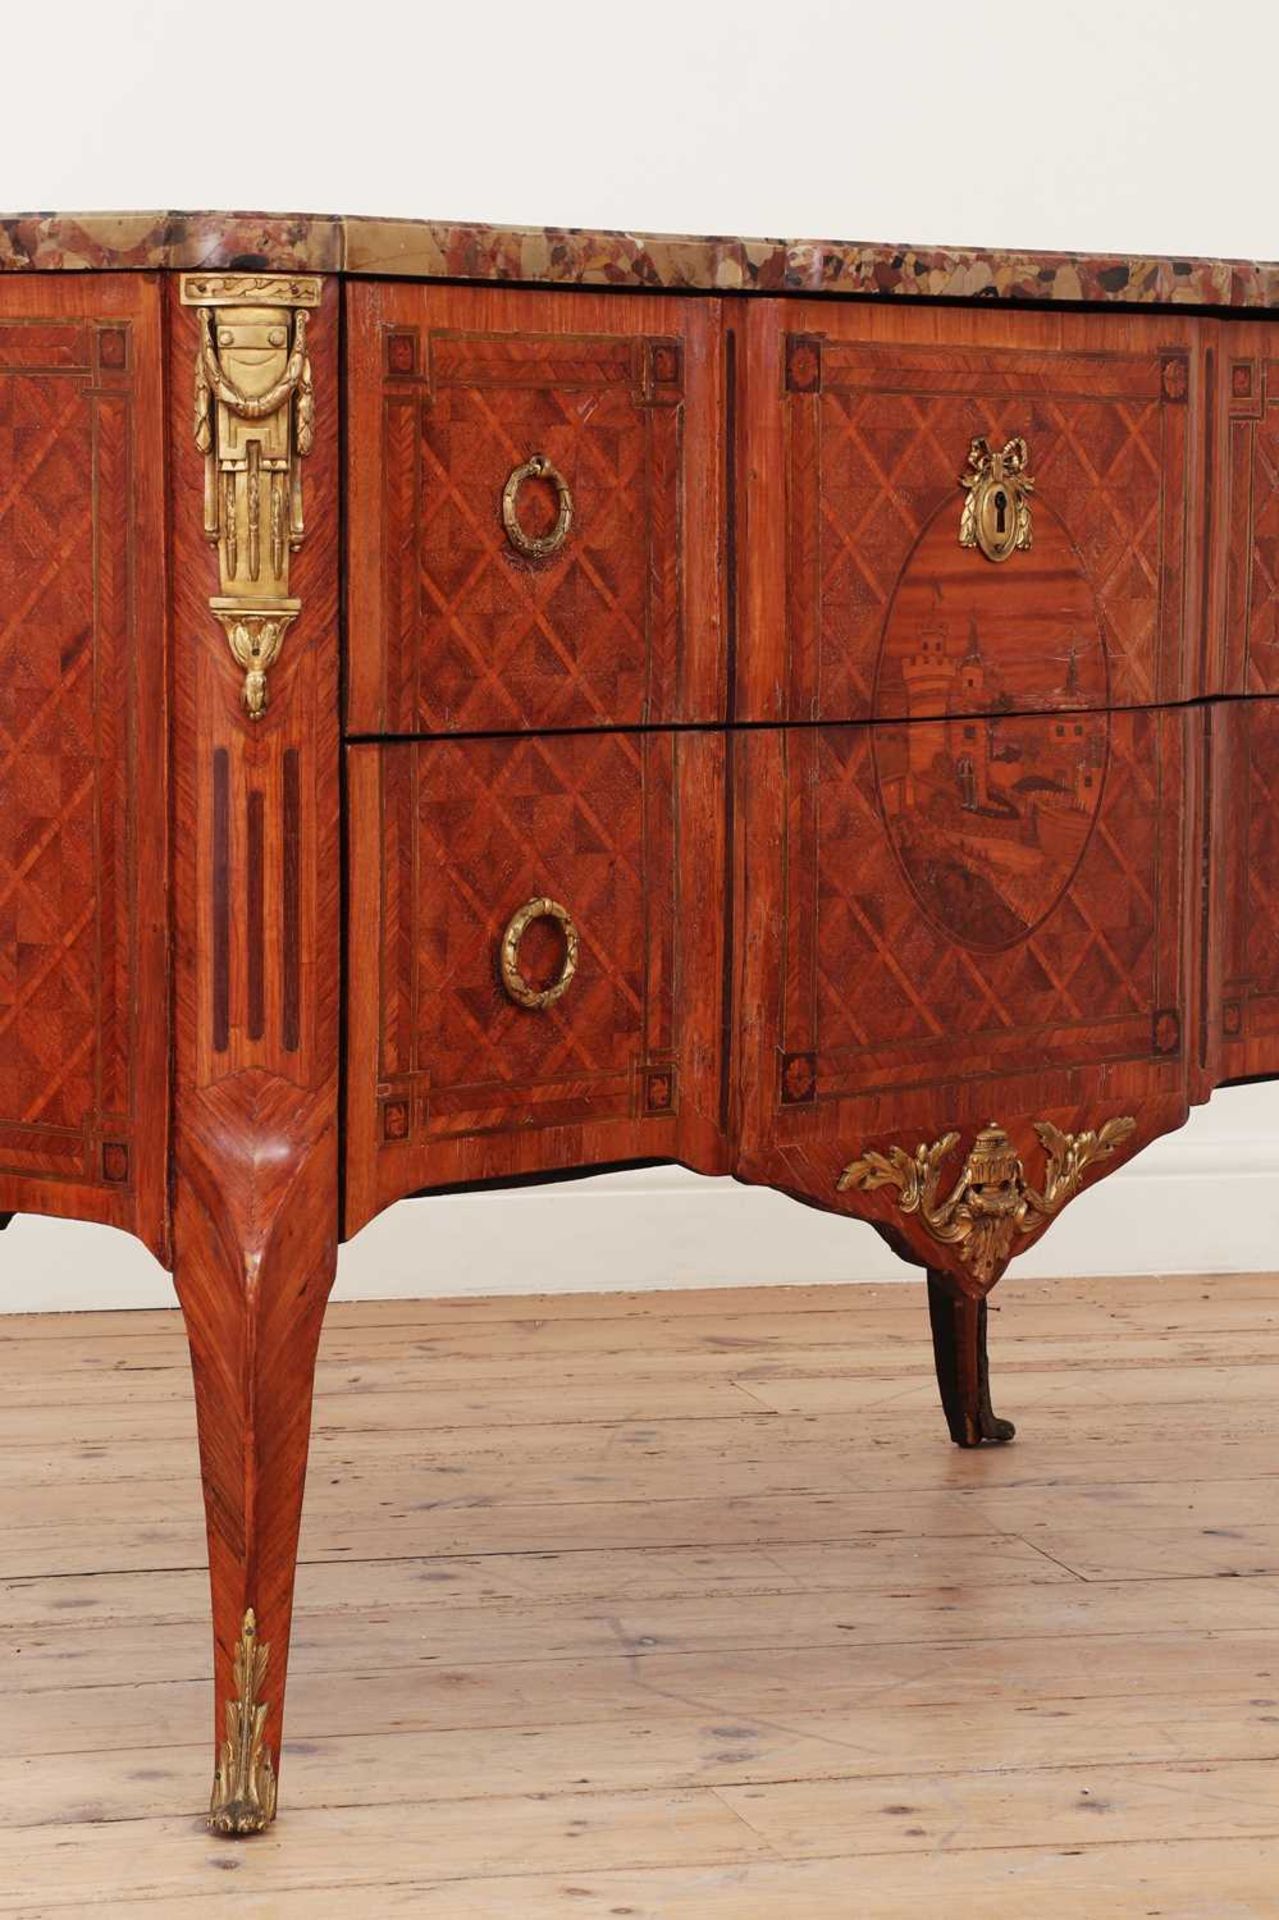 A transitional kingwood, tulipwood and marquetry commode - Image 3 of 26